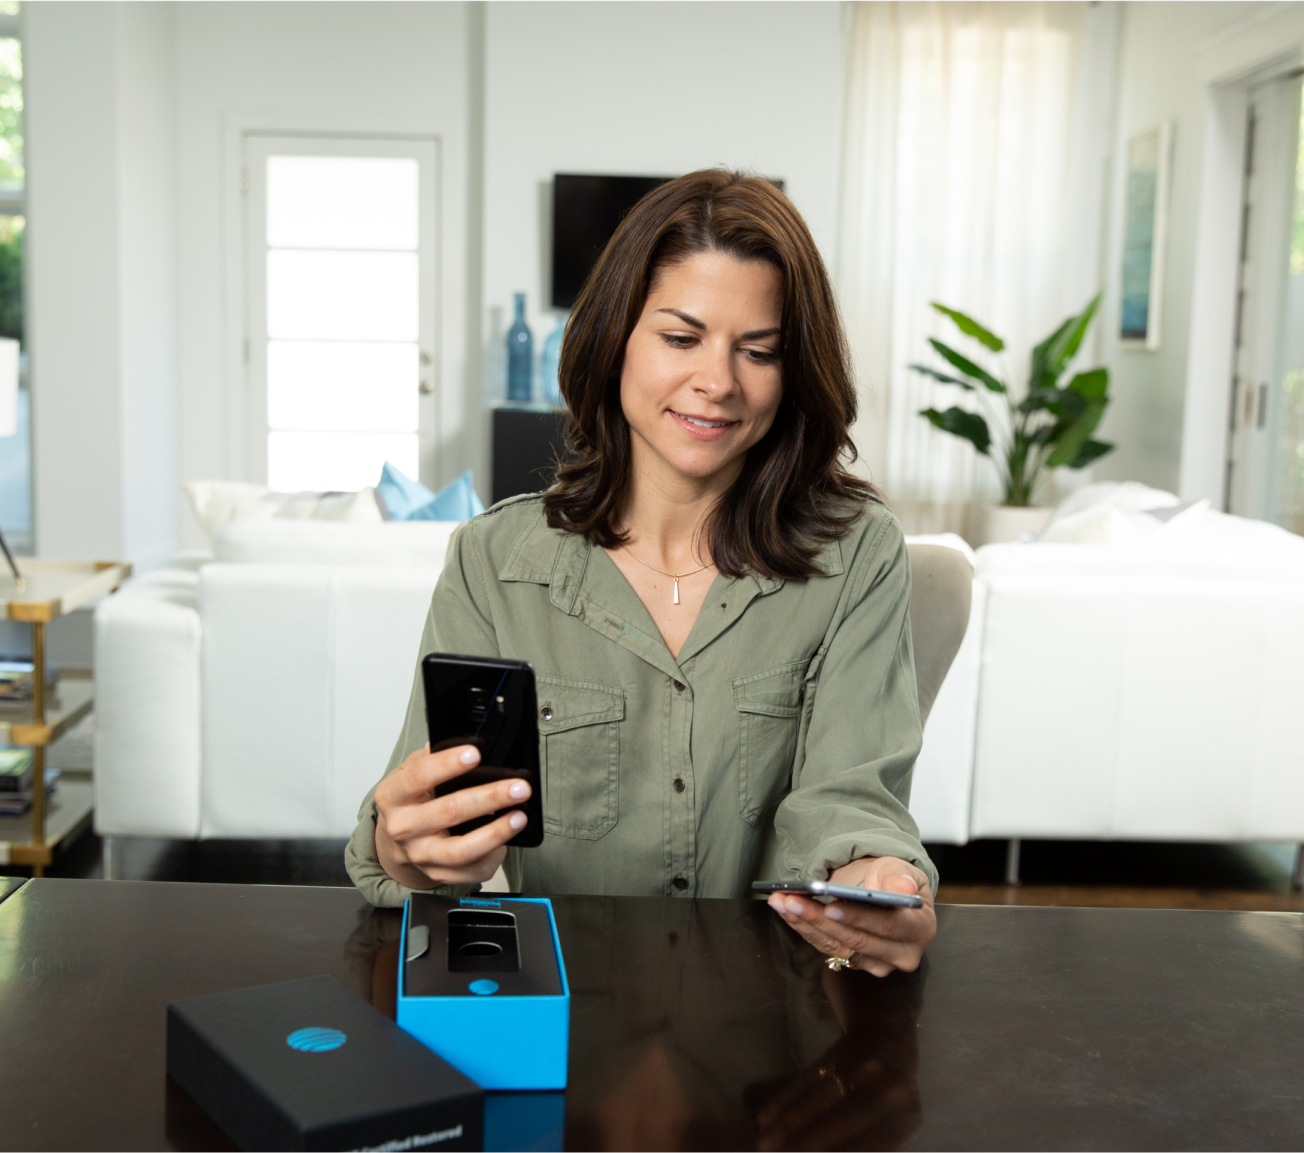 Woman pairing a device with her phone